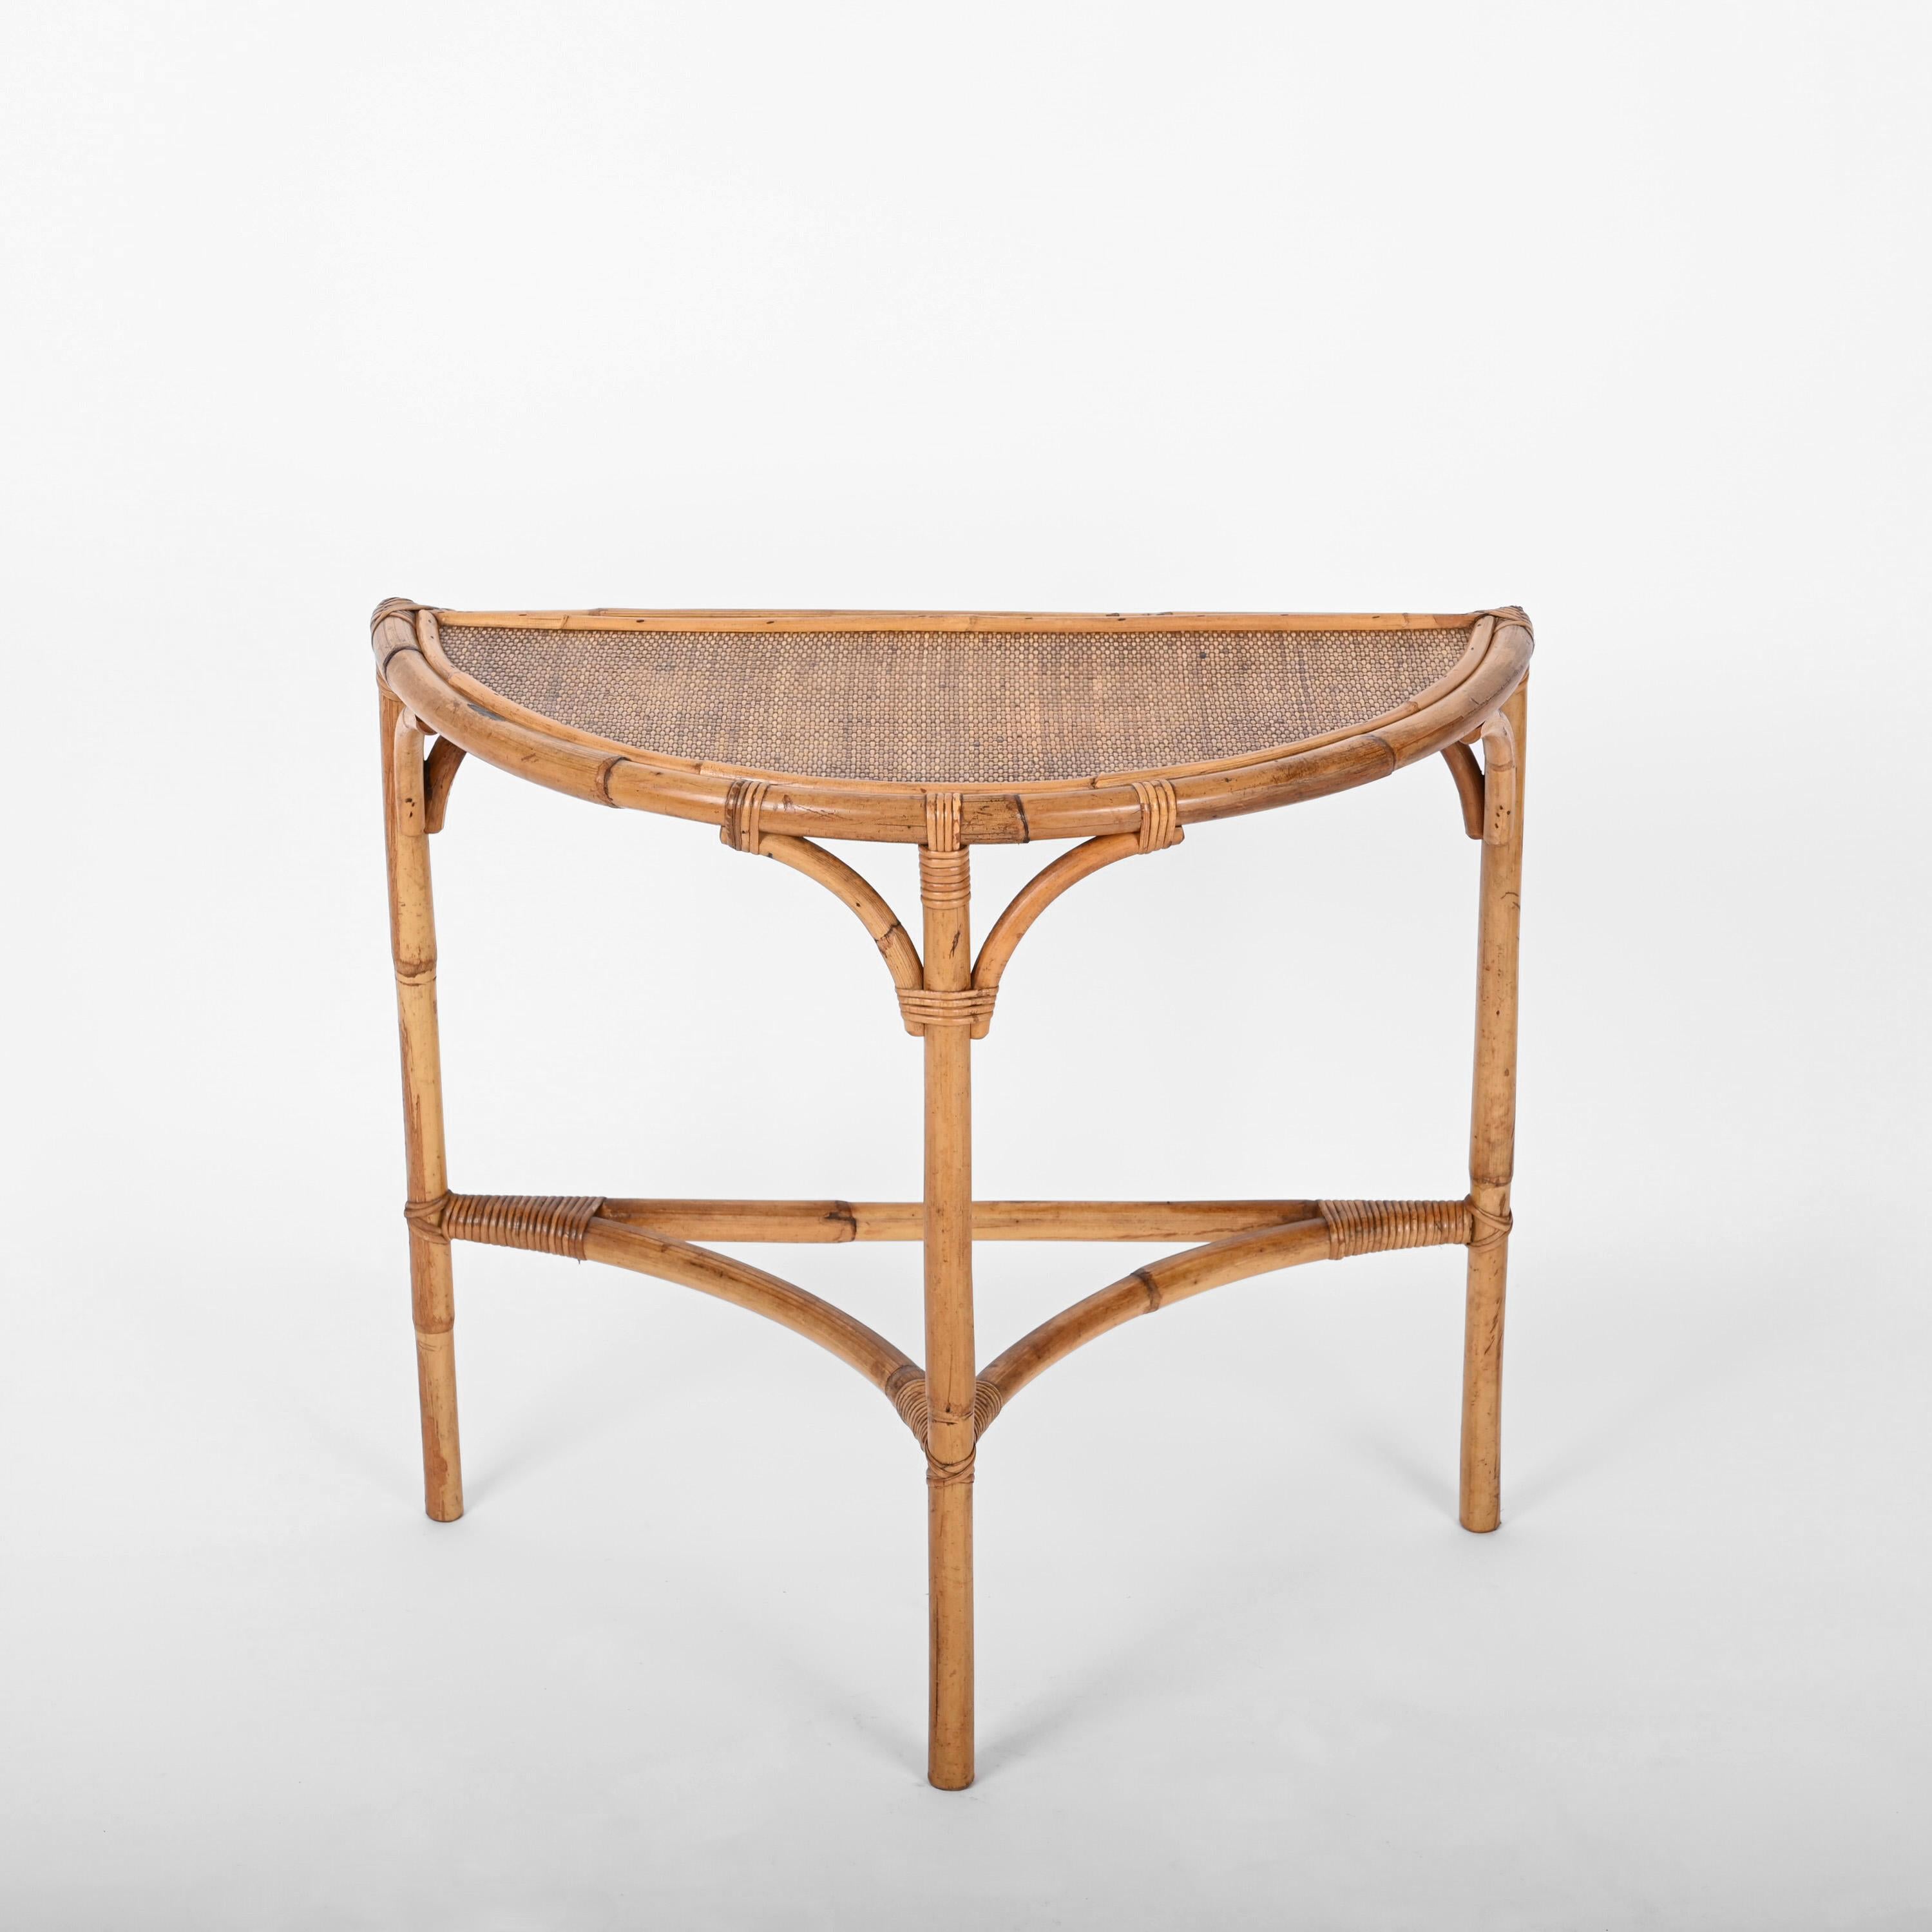 Charming arched bamboo and rattan console table with crescent top. This piece was produced following the style of Franco Albini in Italy during the 1970s.

This console table has a structure laying on three bamboo legs joined together. This